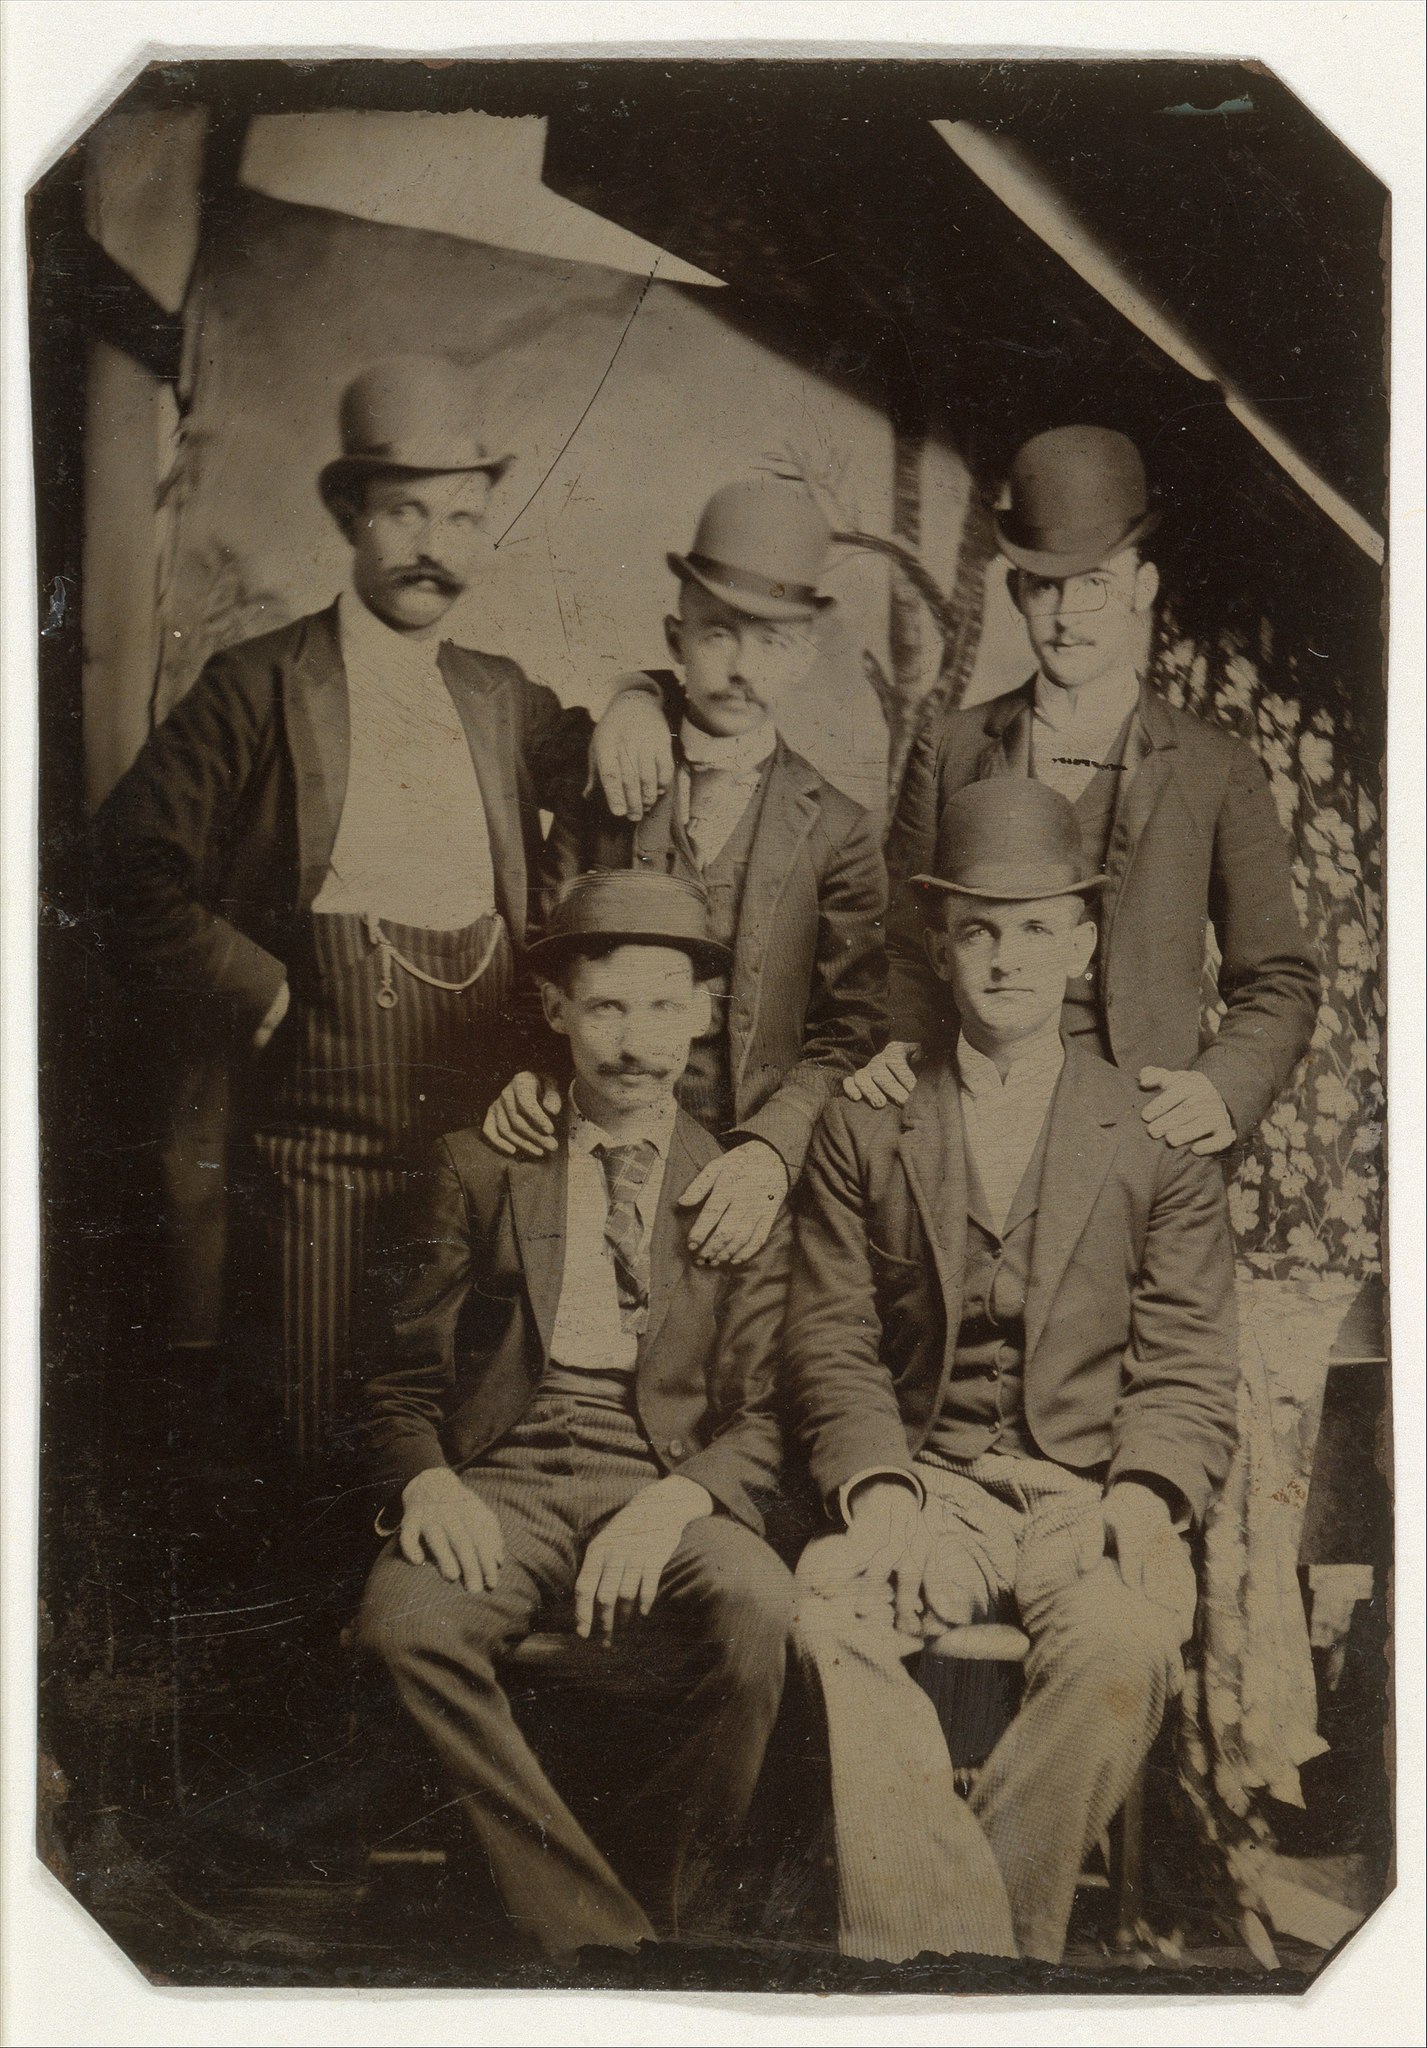 An old photograph of outlaws from the Wild West